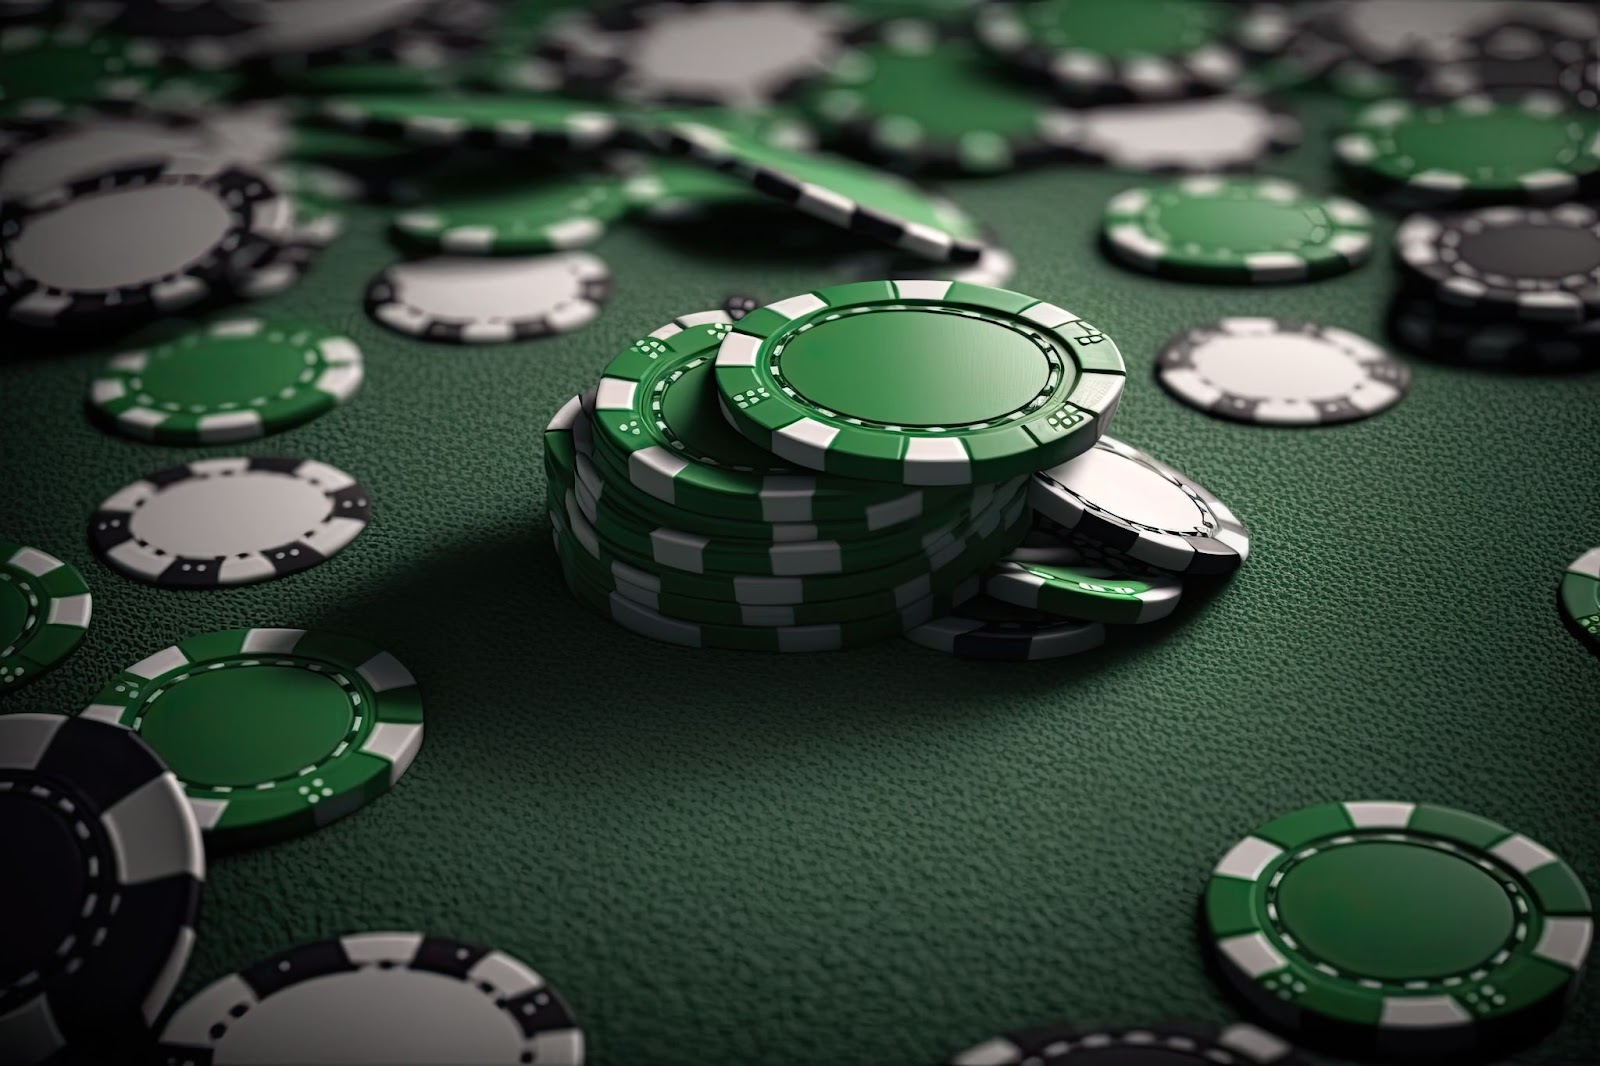 Green and white casino chips scattered on a green felt surface.